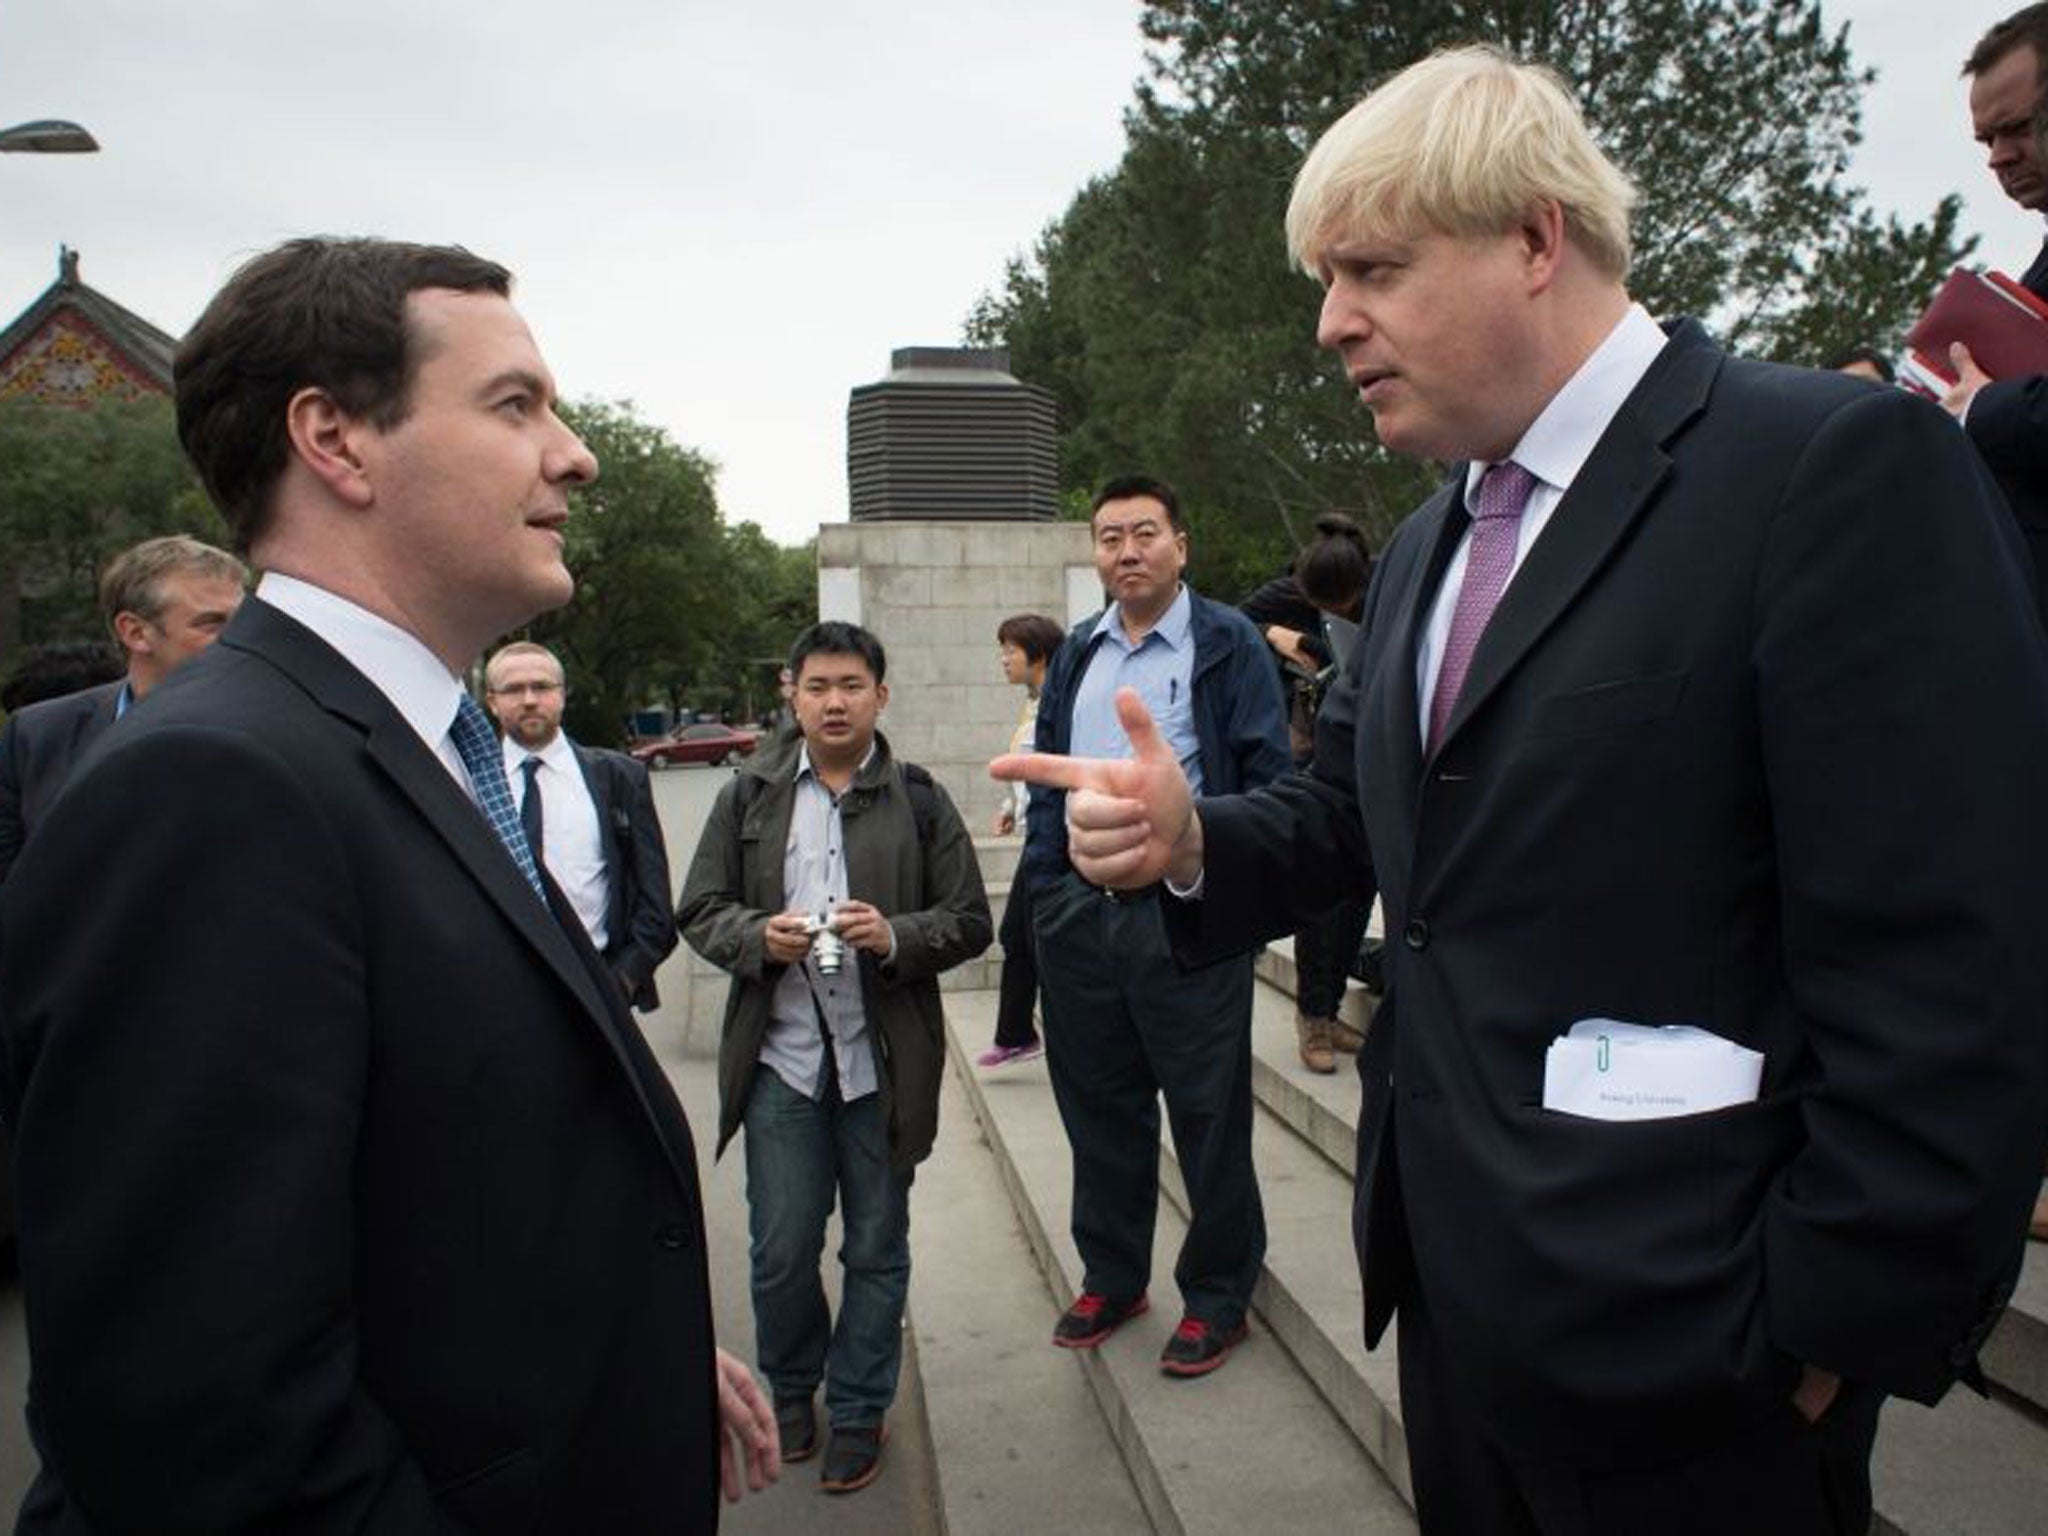 File photo from October last year, as friends of London mayor Boris Johnson played down reports of a growing feud with Chancellor George Osborne and the Conservative Party leadership